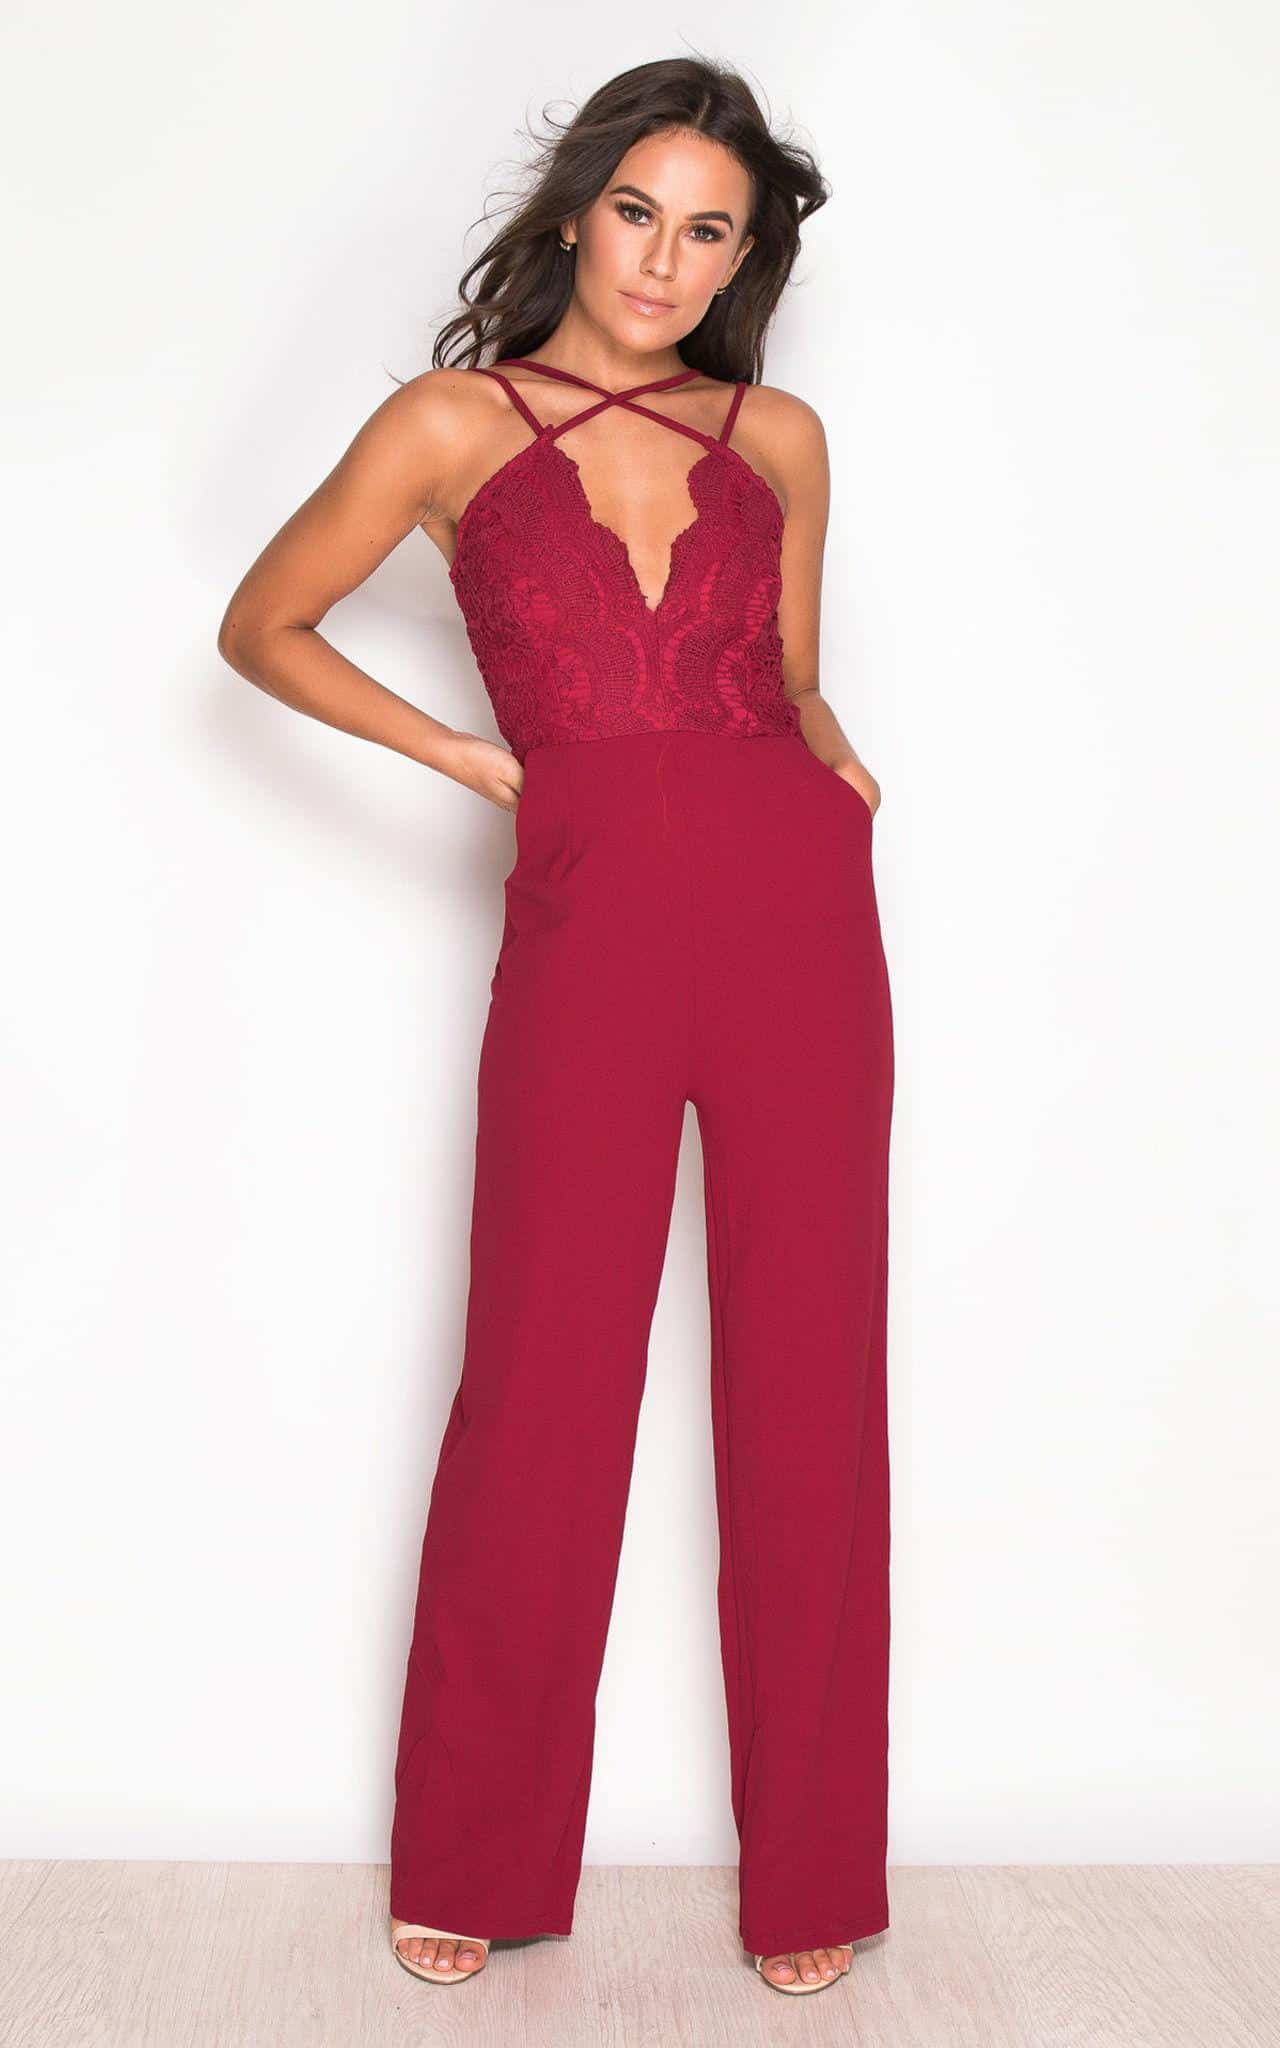 Bridesmaid Jumpsuits - The Inspired Bride